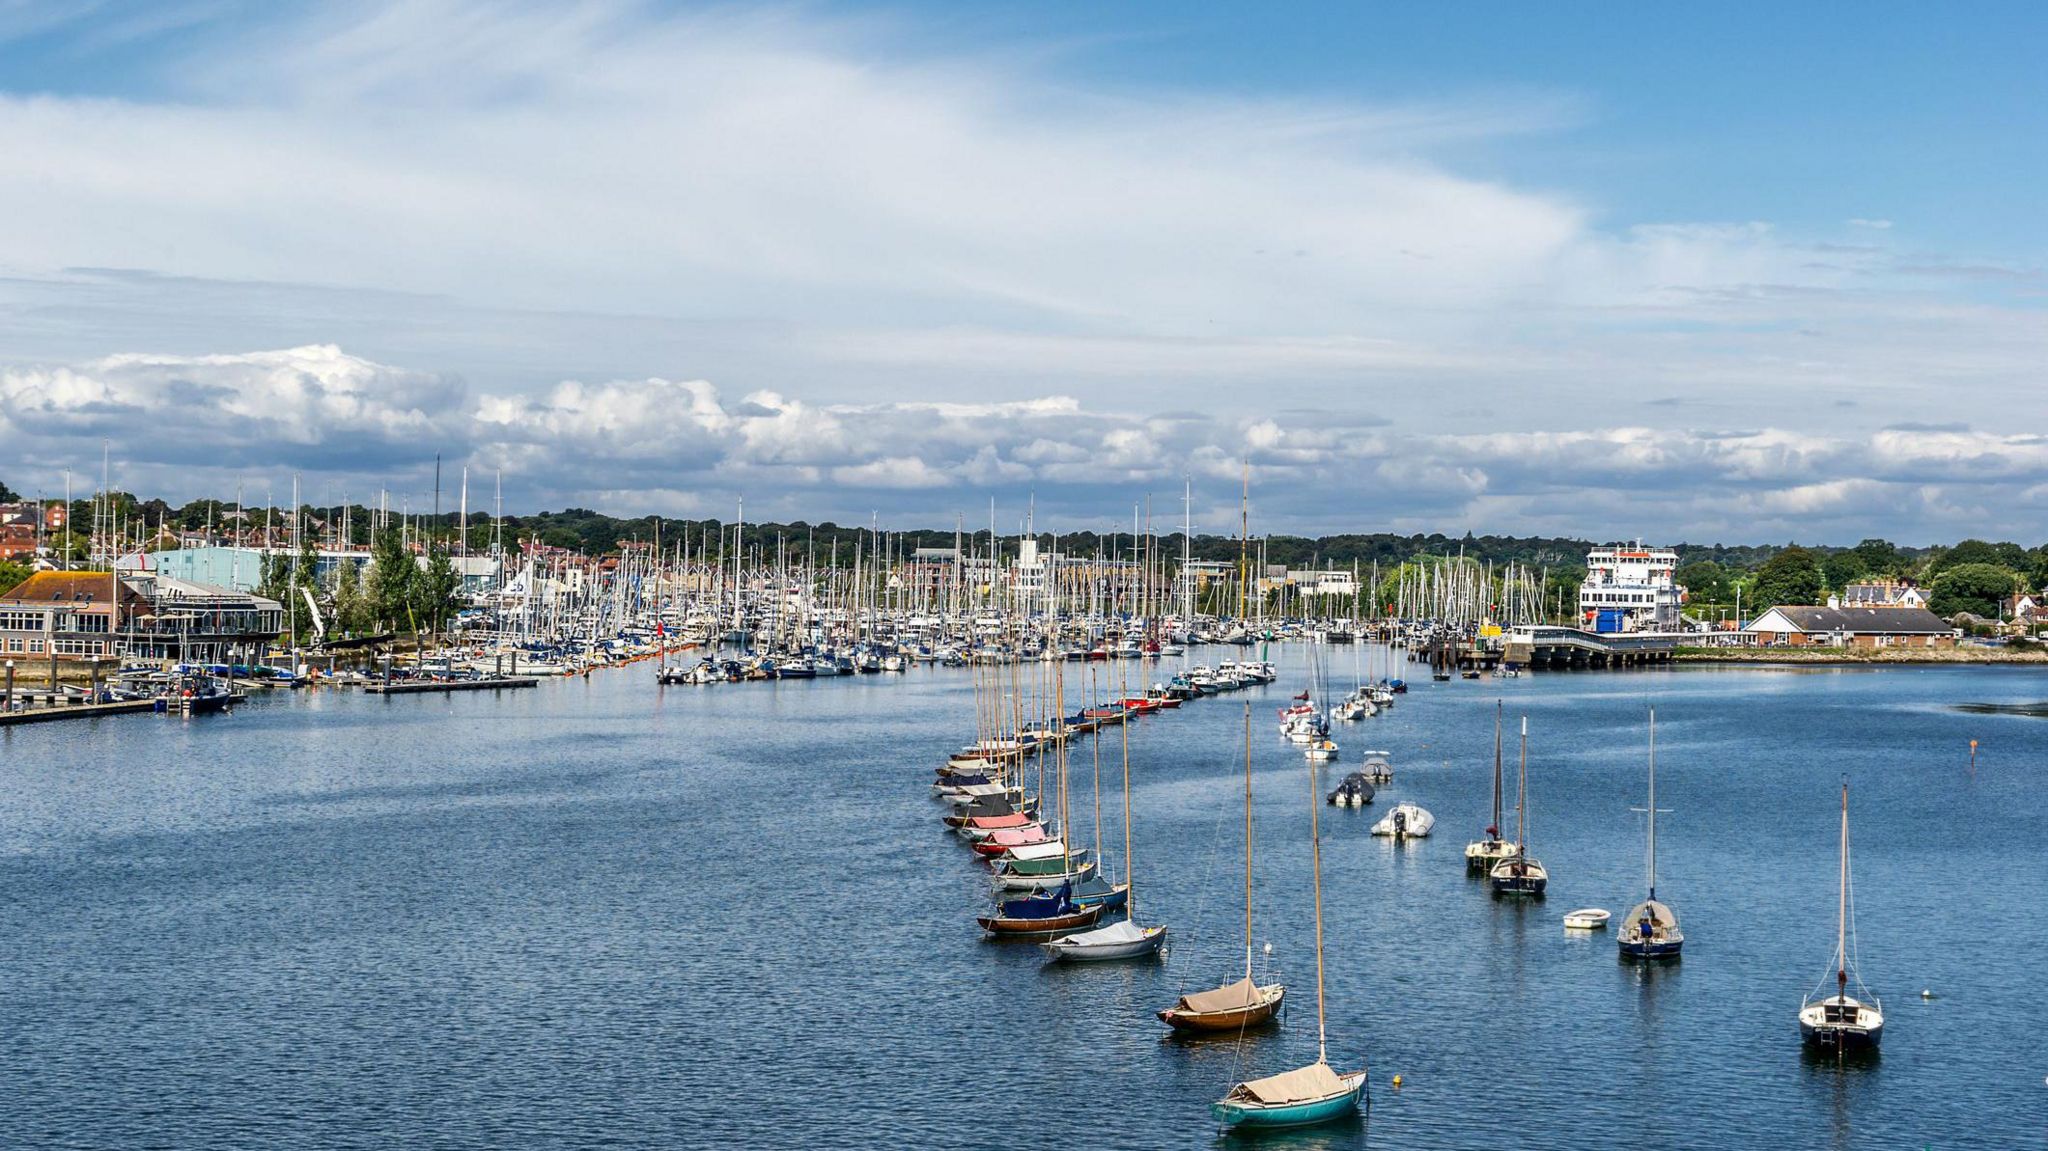 Lymington Harbour - with boats and water in the picture